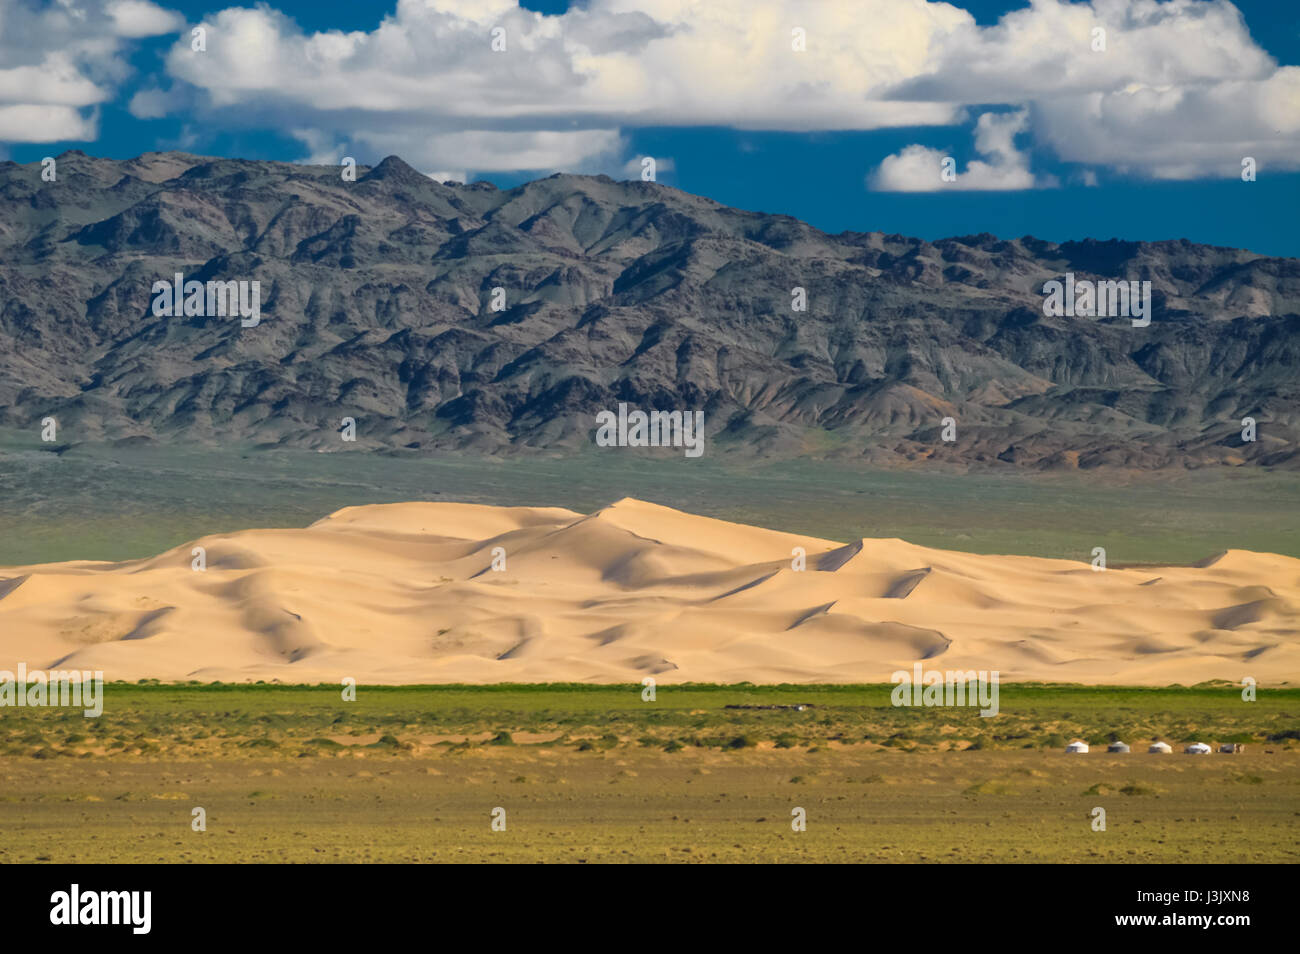 Altai Mountains with sand dunes and yurts Stock Photo